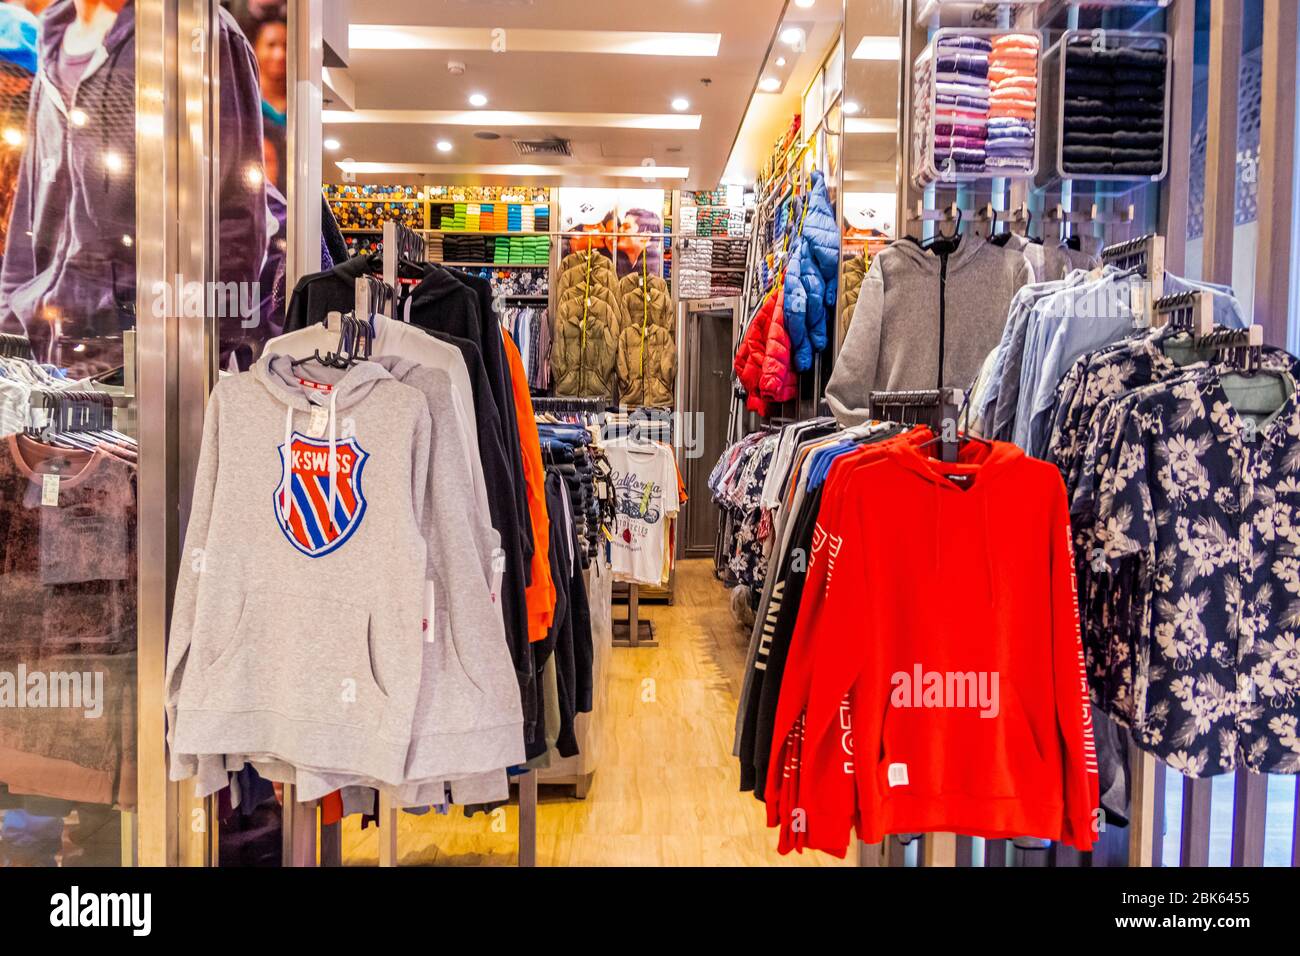 The Second Hand Clothes In The Shop At Blueport Department Store Hua Hin Thailand April 2 2020 Stock Photo Alamy